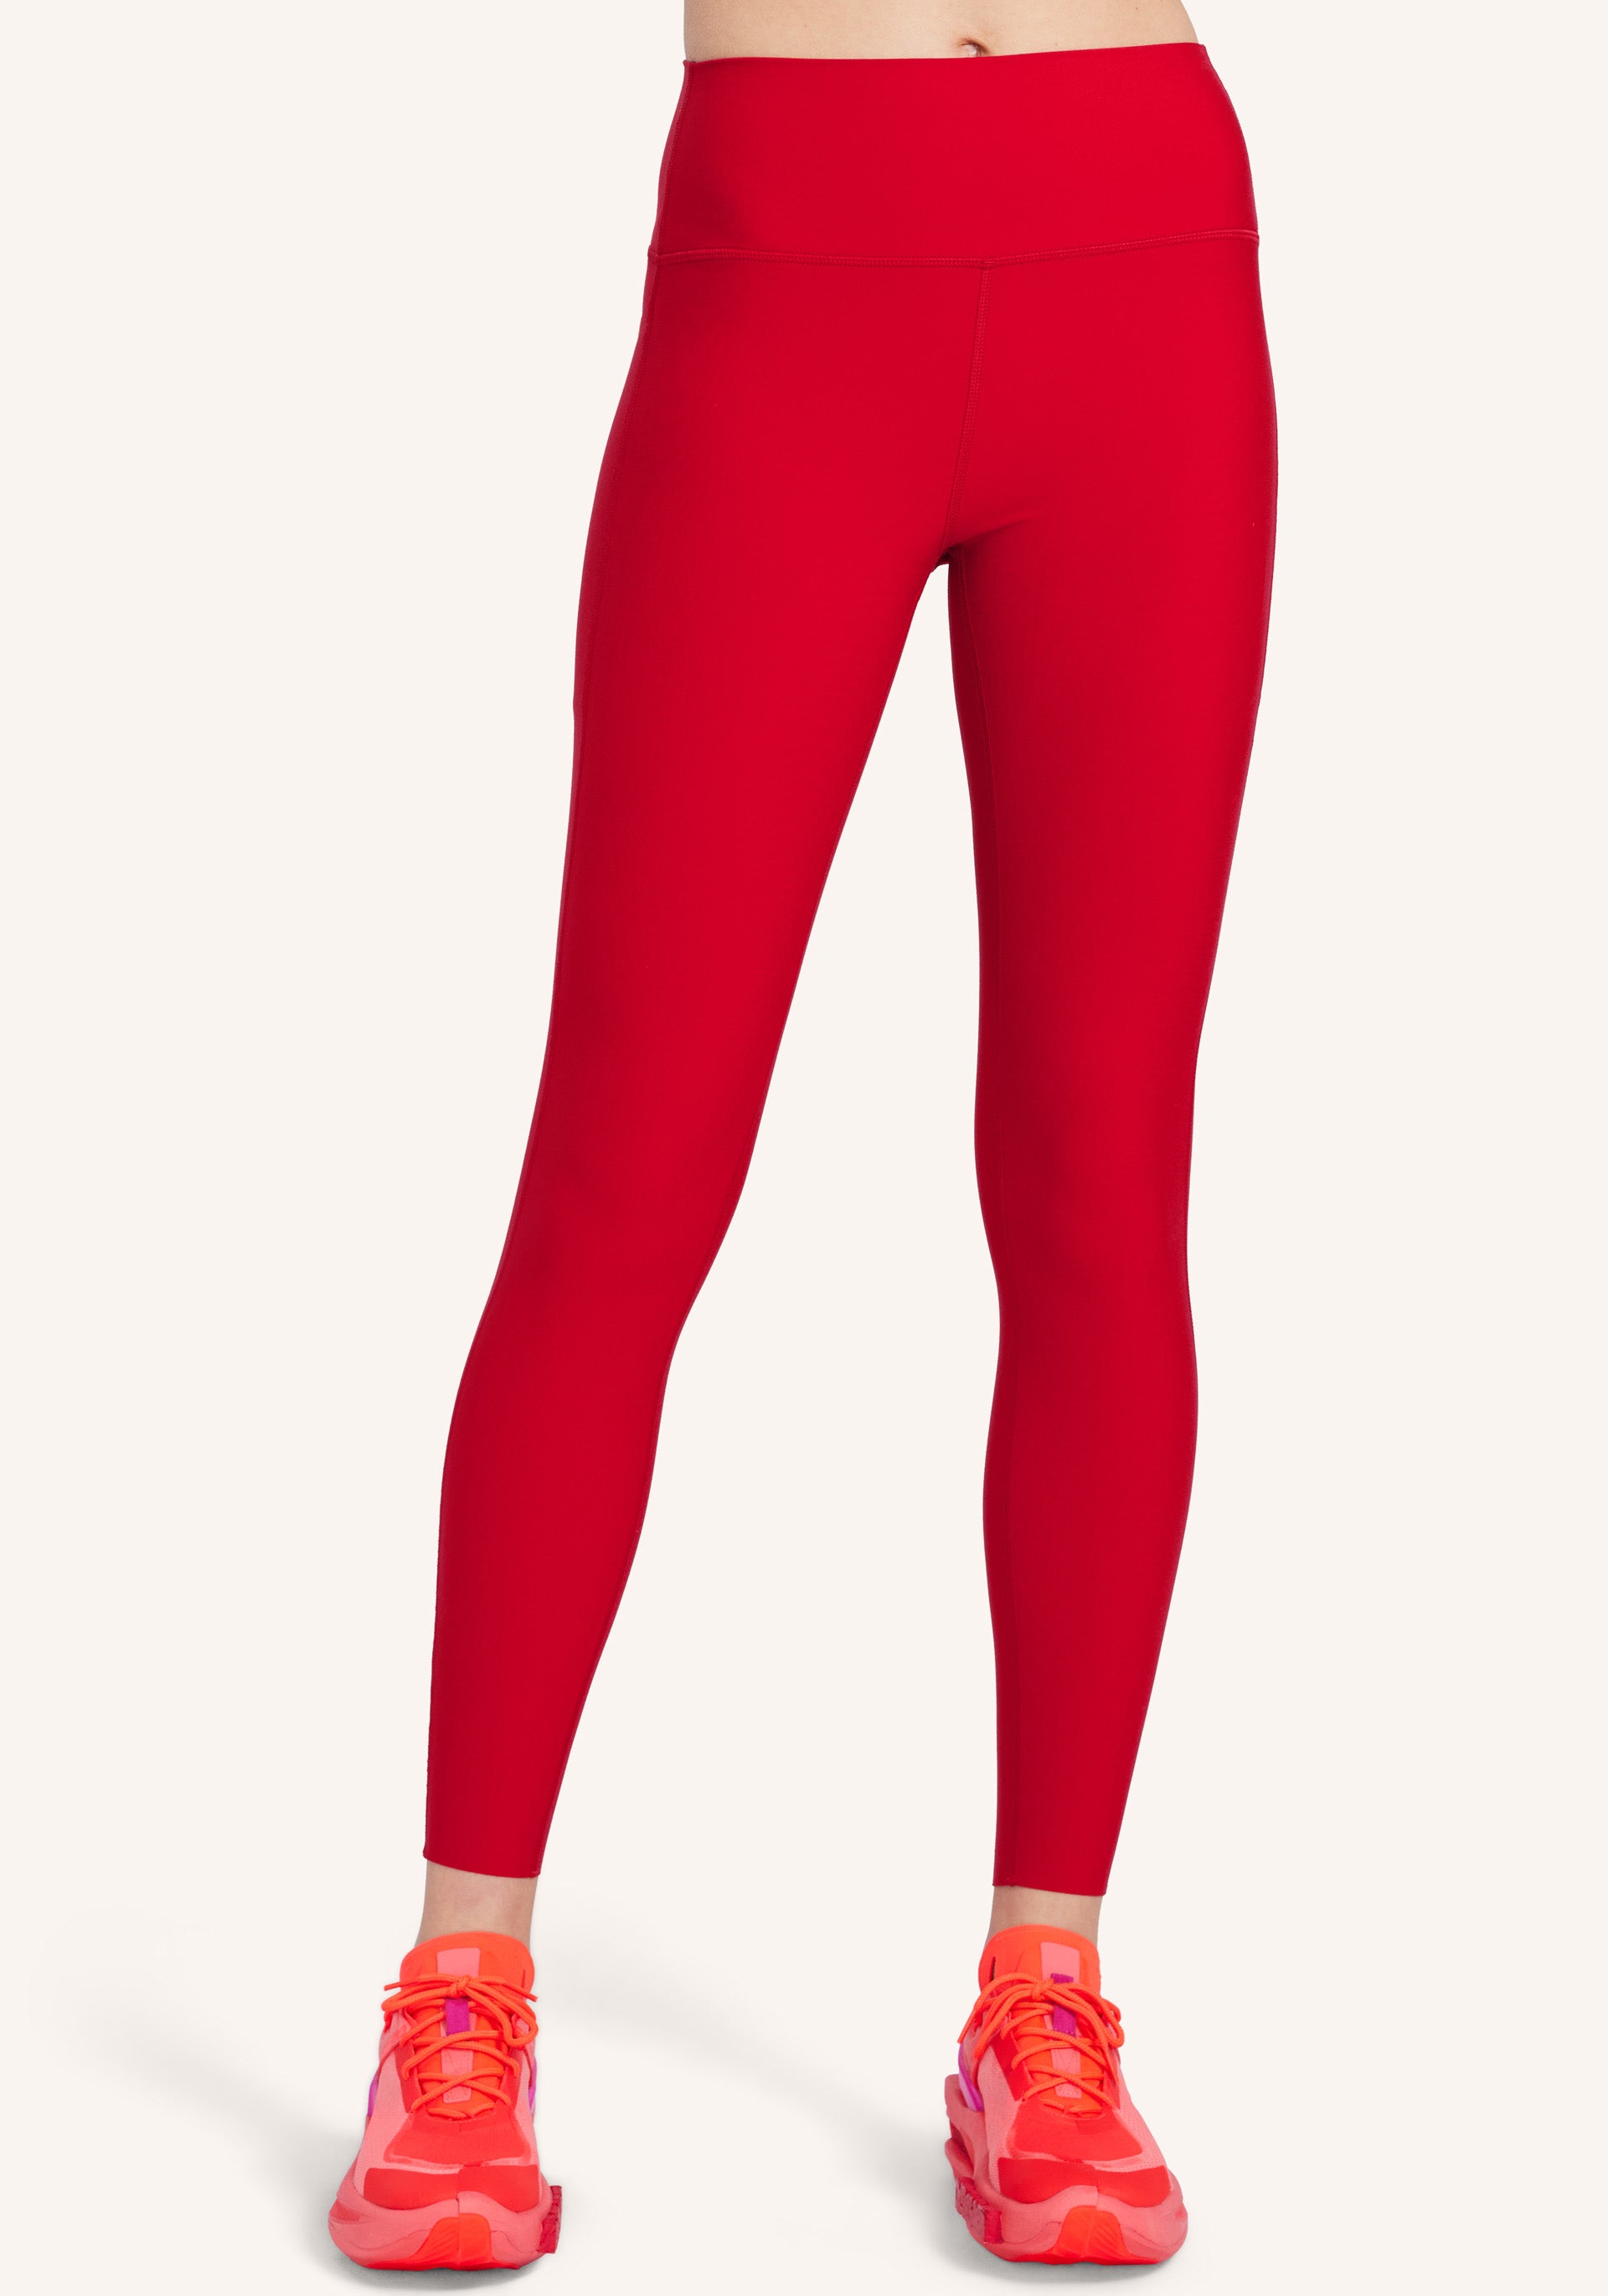 Cute Leggings: Peloton Standard Cadent High Rise 7/8 Legging, The Peloton  Bike Is Discounted For the  Prime Early Access Sale